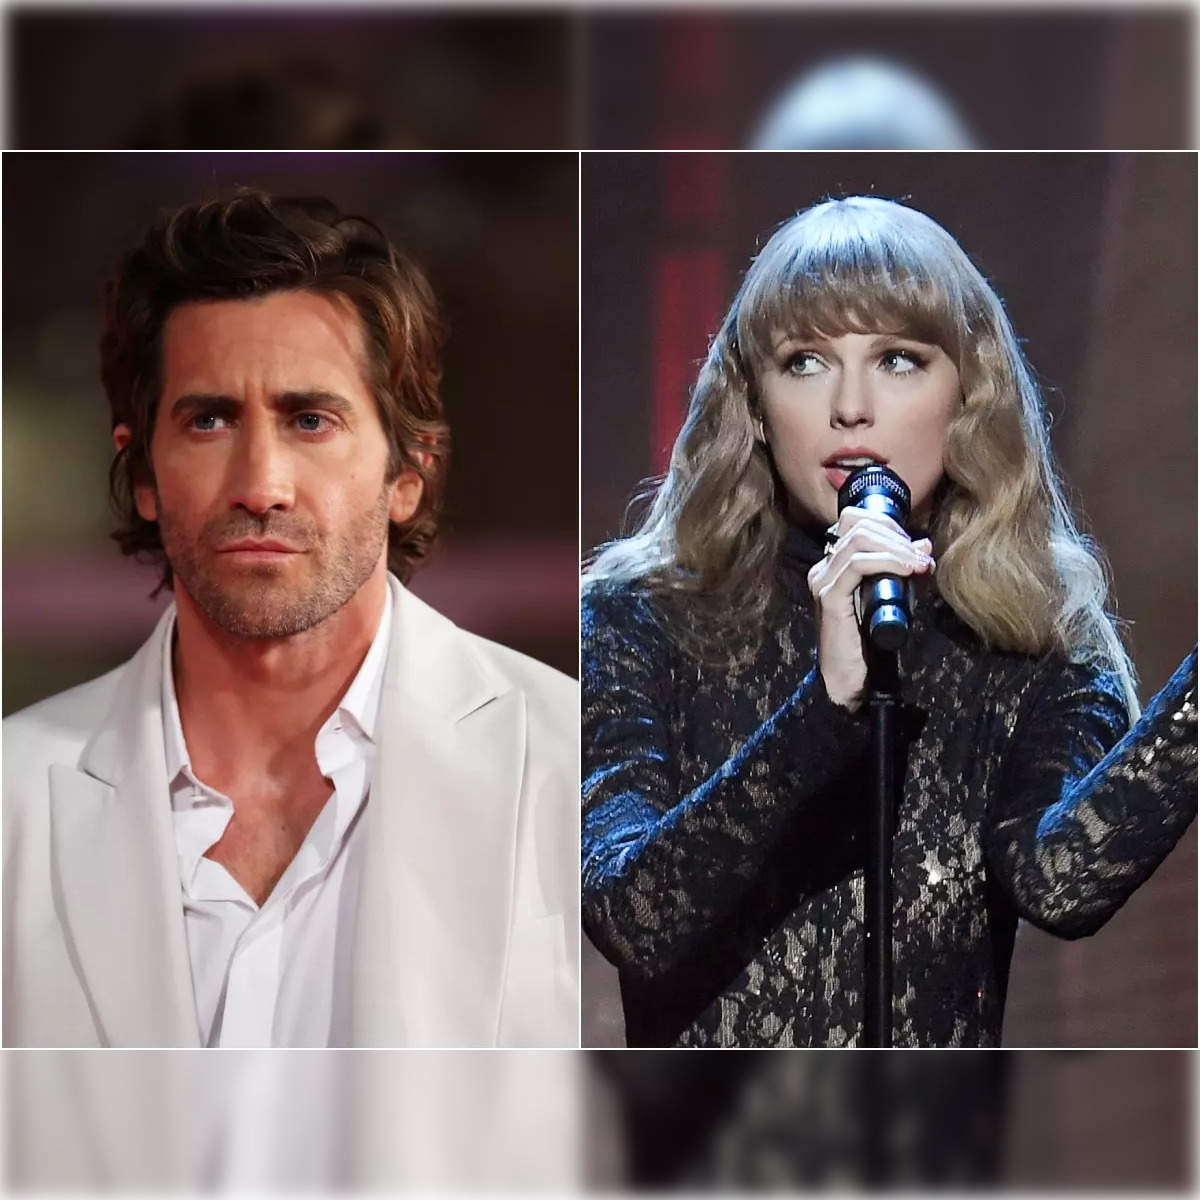 jake gyllenhaal: 'Where is Jake Gyllenhaal? Let's talk.' Fans troll actor  after Taylor Swift releases 10-minute version of 'All Too Well' - The  Economic Times